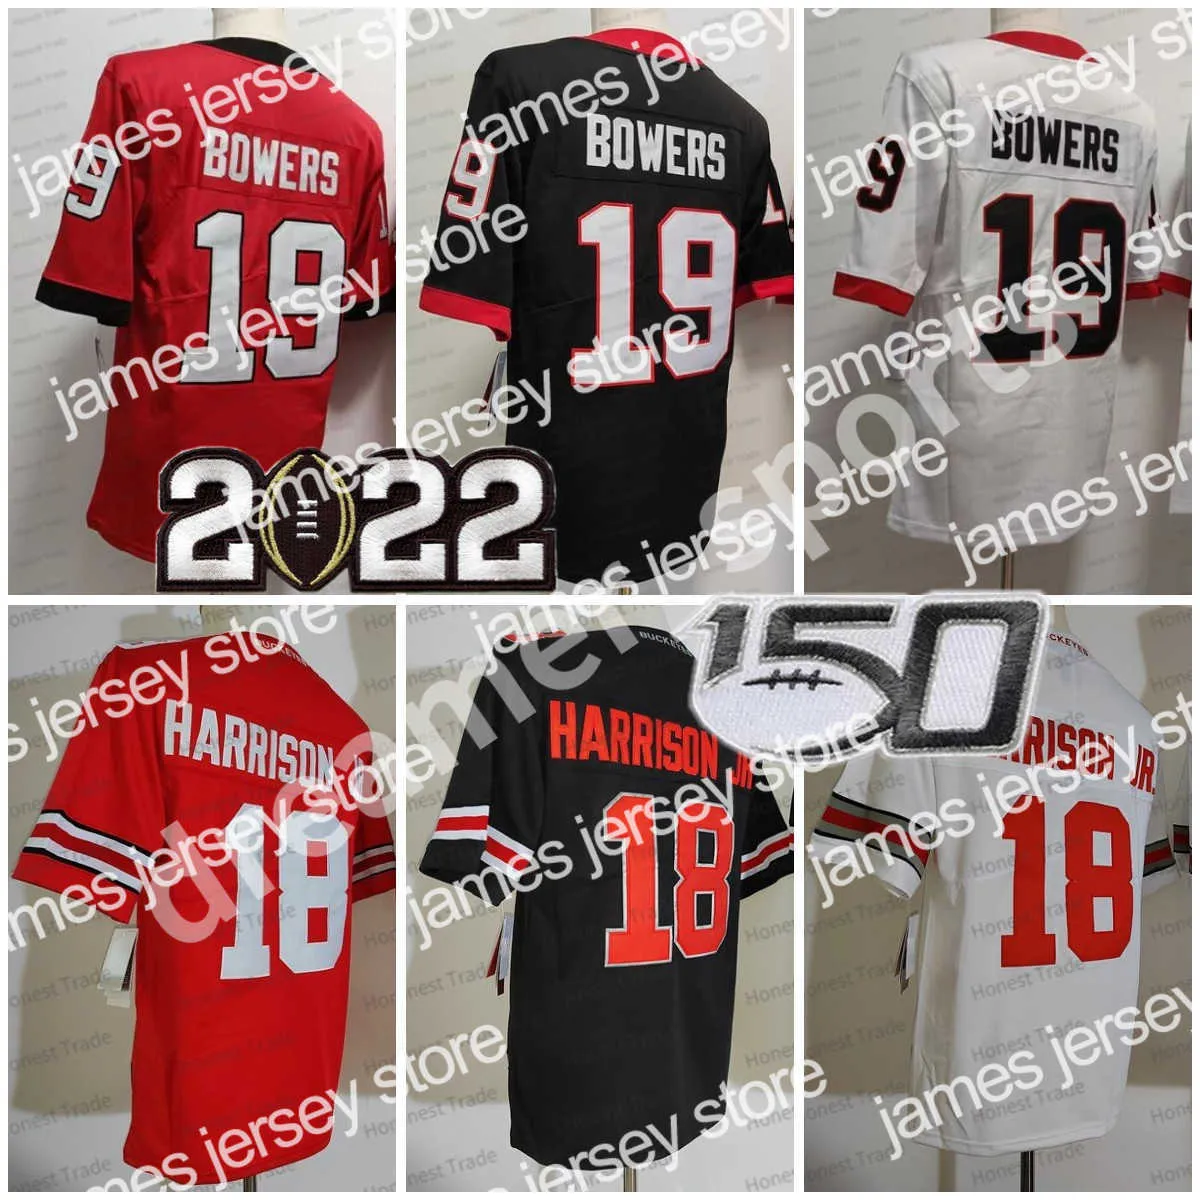 American College Football Wear Maillot de football NCAA 18 Marvin Harrison Jr. Ohio State Buckeyes Brock 19 Bowers New Red White Black Stitched Mens Jerseys 2022 150e